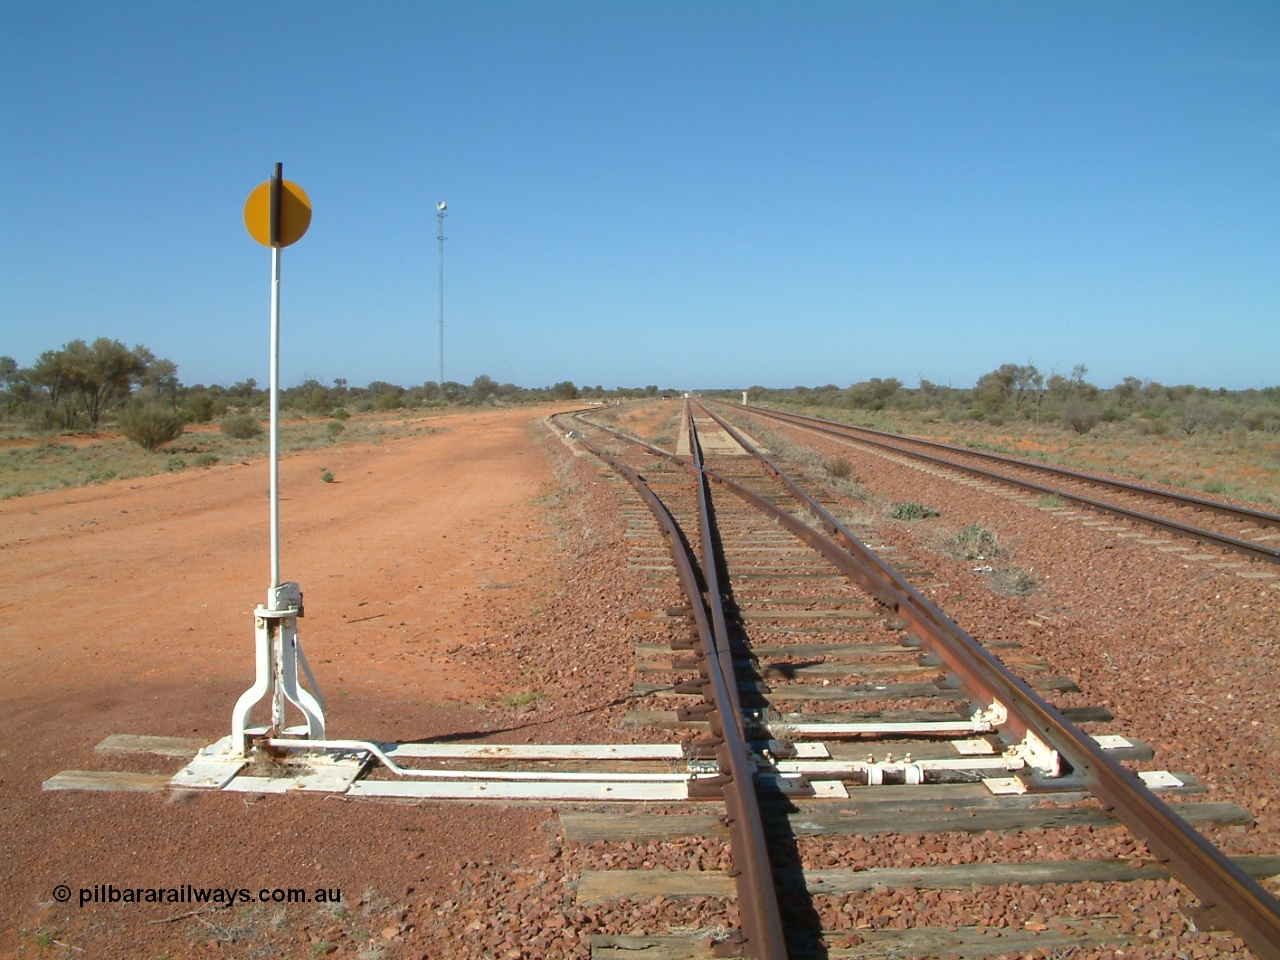 030416 095258
Wirrida Siding, looking south towards Tarcoola with the goods siding and points rejoining the loop, notice the points are on timber sleepers while the loop and mainlines are on concrete, train control 'pillbox' in the distance. Located at the 641 km from the 0 datum at Coonamia and 137 km north of Tarcoola between Carnes and Manguri on the Tarcoola - Alice Springs line. [url=https://goo.gl/maps/kr4tGiBQqpQpopy56]GeoData location[/url]. 16th April 2003.
